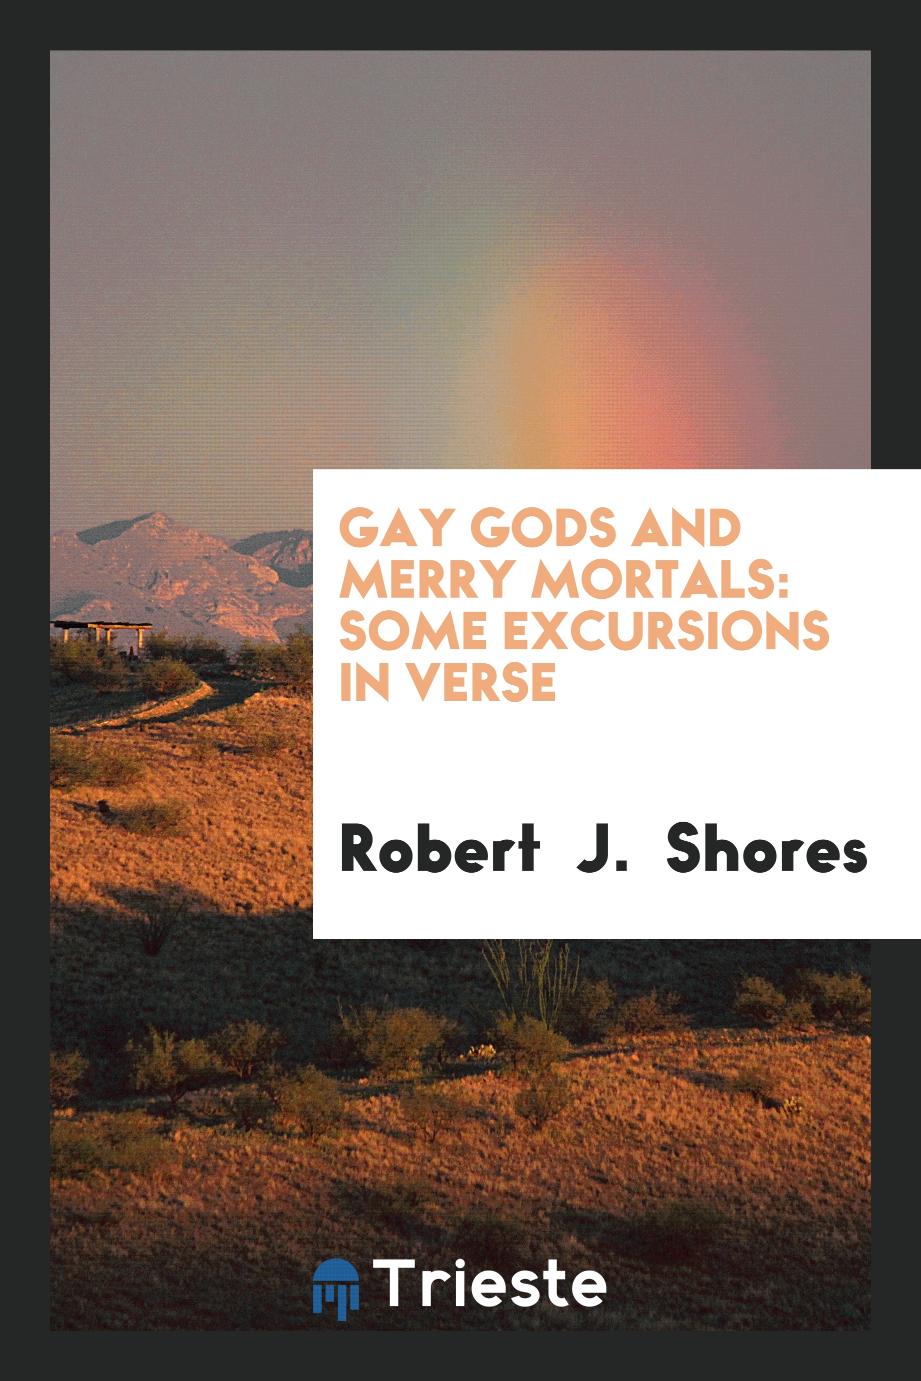 Gay Gods and Merry Mortals: Some Excursions in Verse